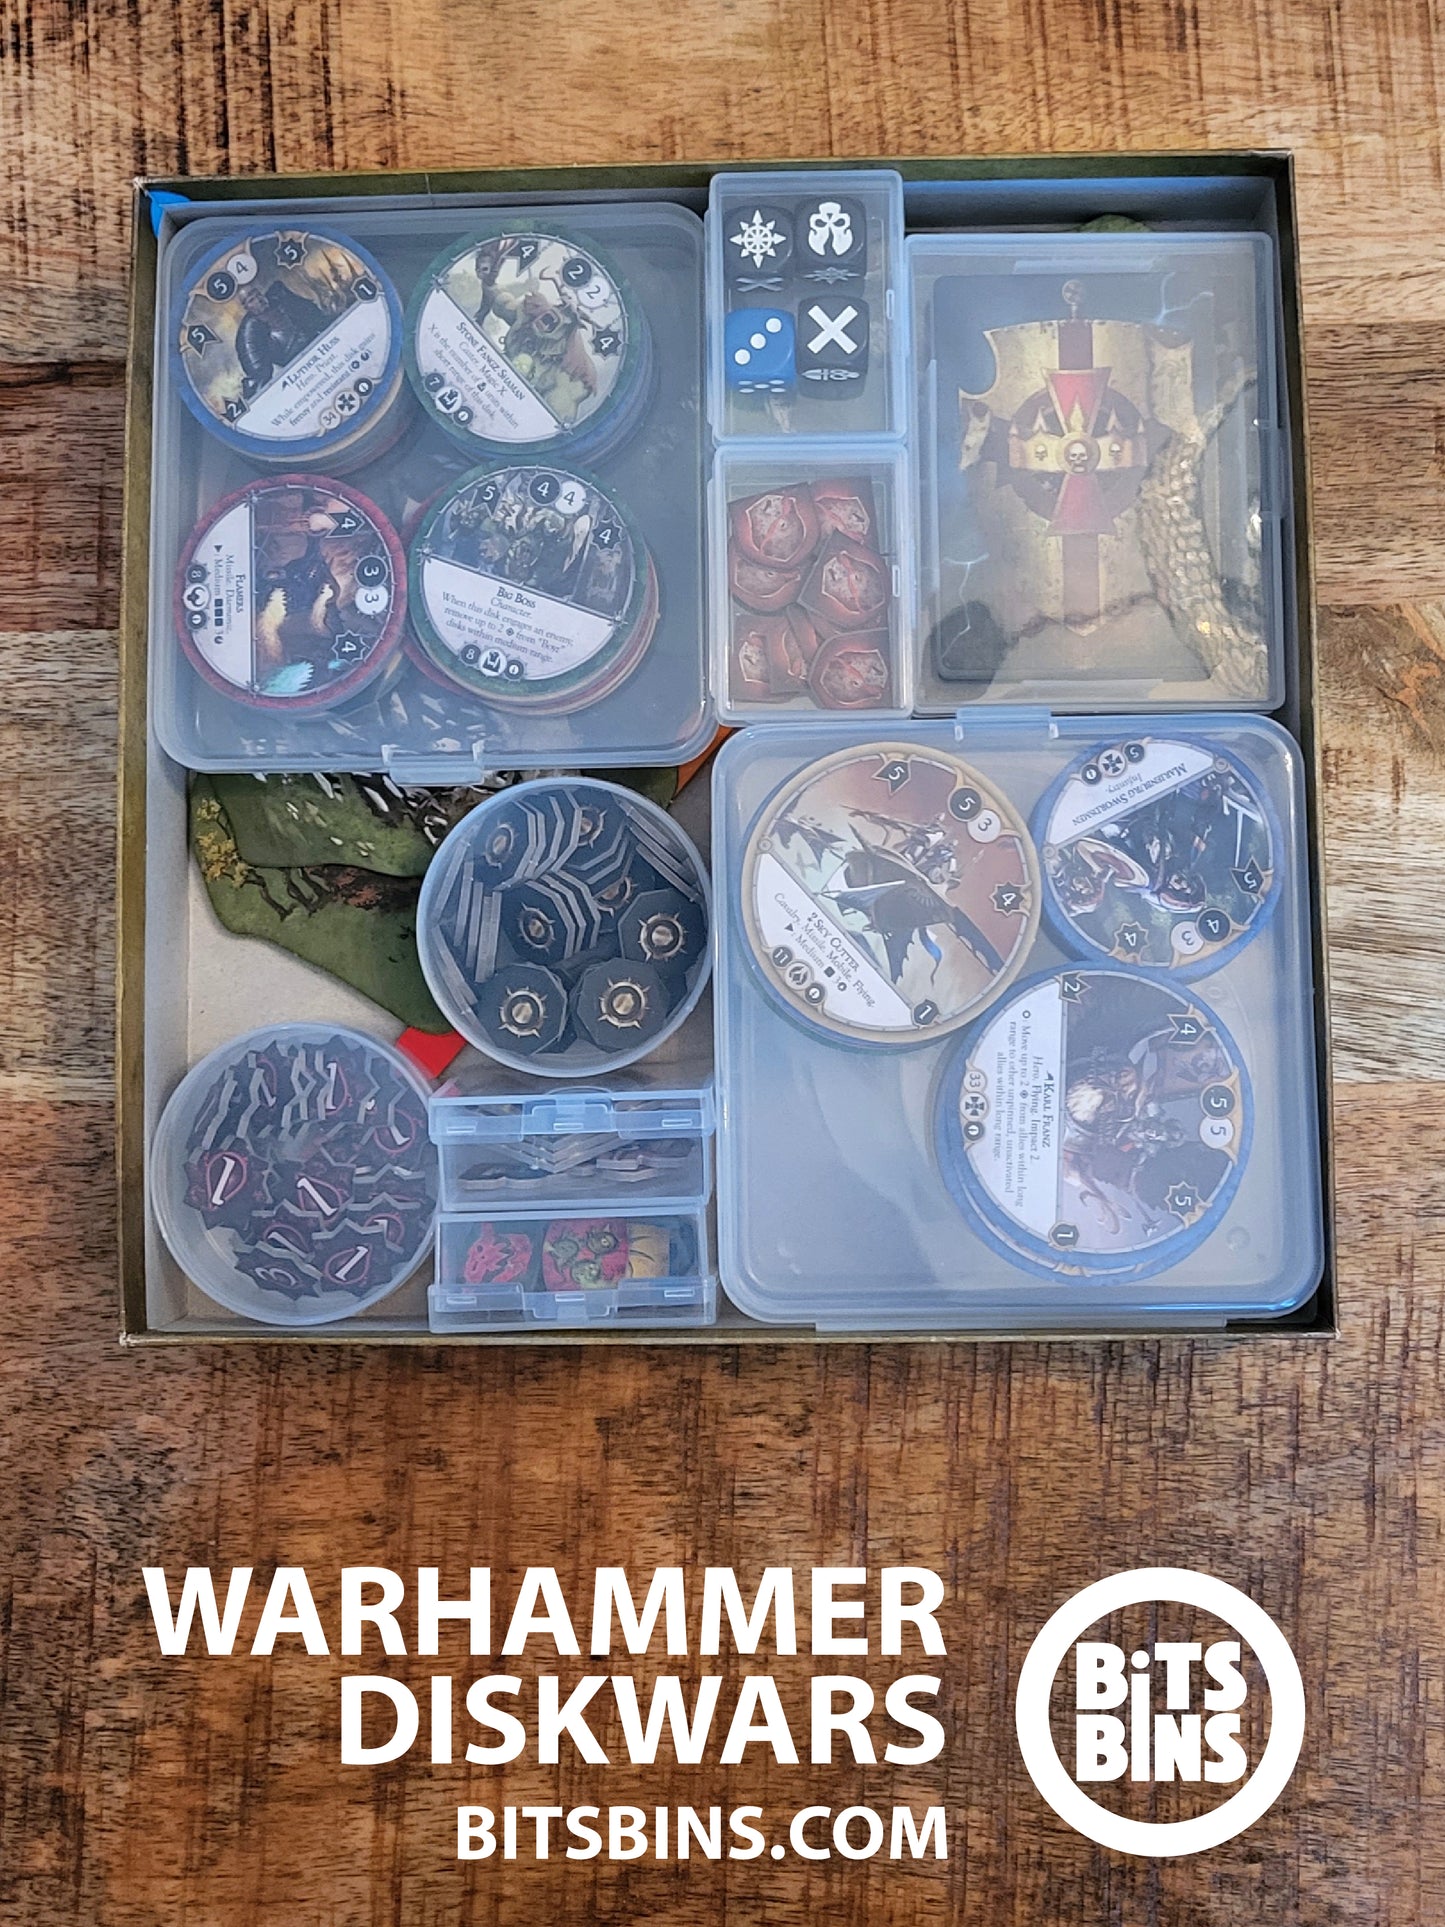 RECOMMENDED Bitsbins Warhammer Diskwars - 2 Pods, 4 Minis, 1 Card Box, 3 Flats